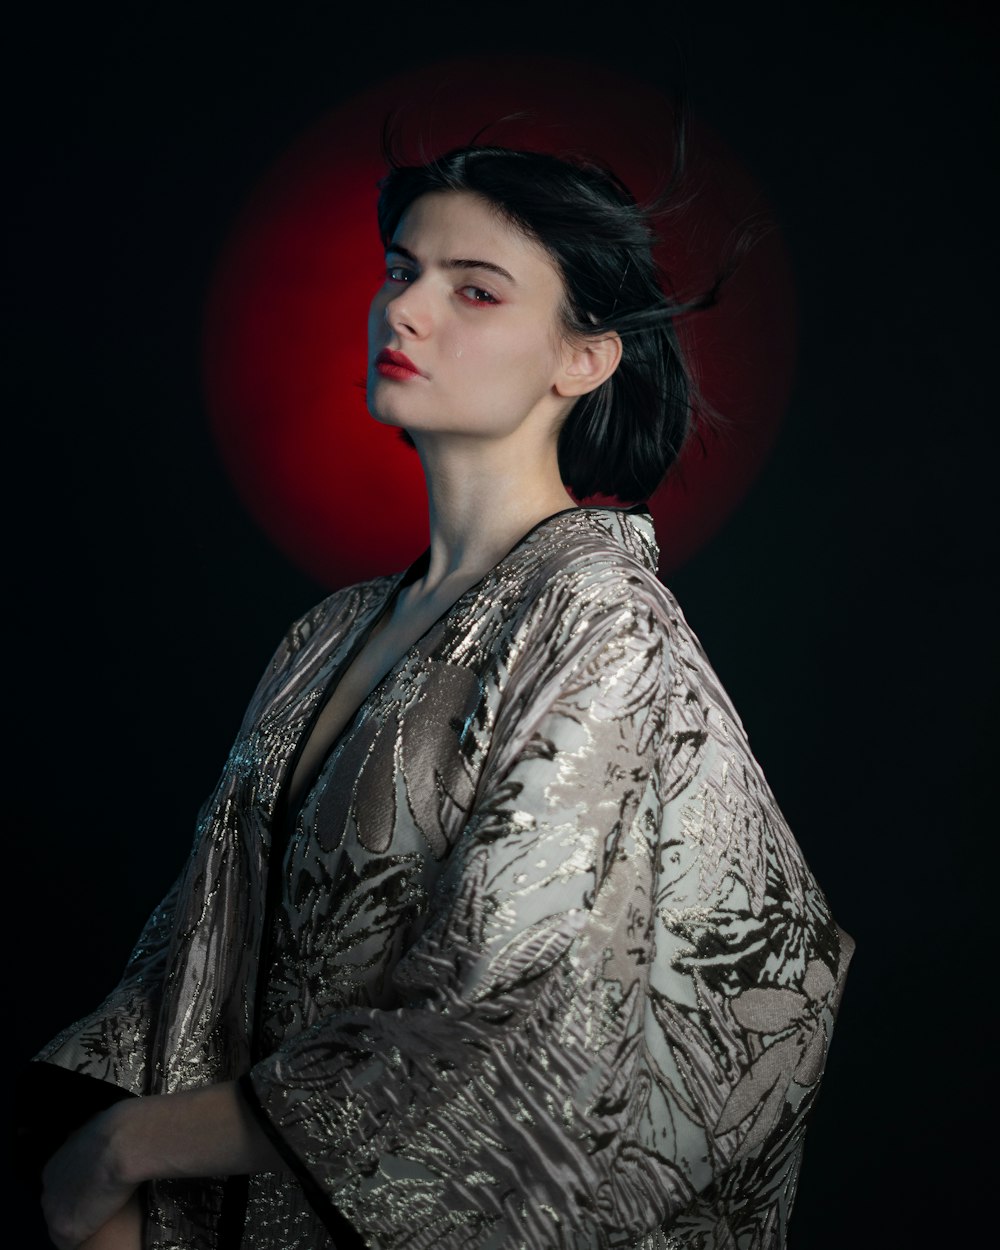 a woman in a kimono standing in front of a red light